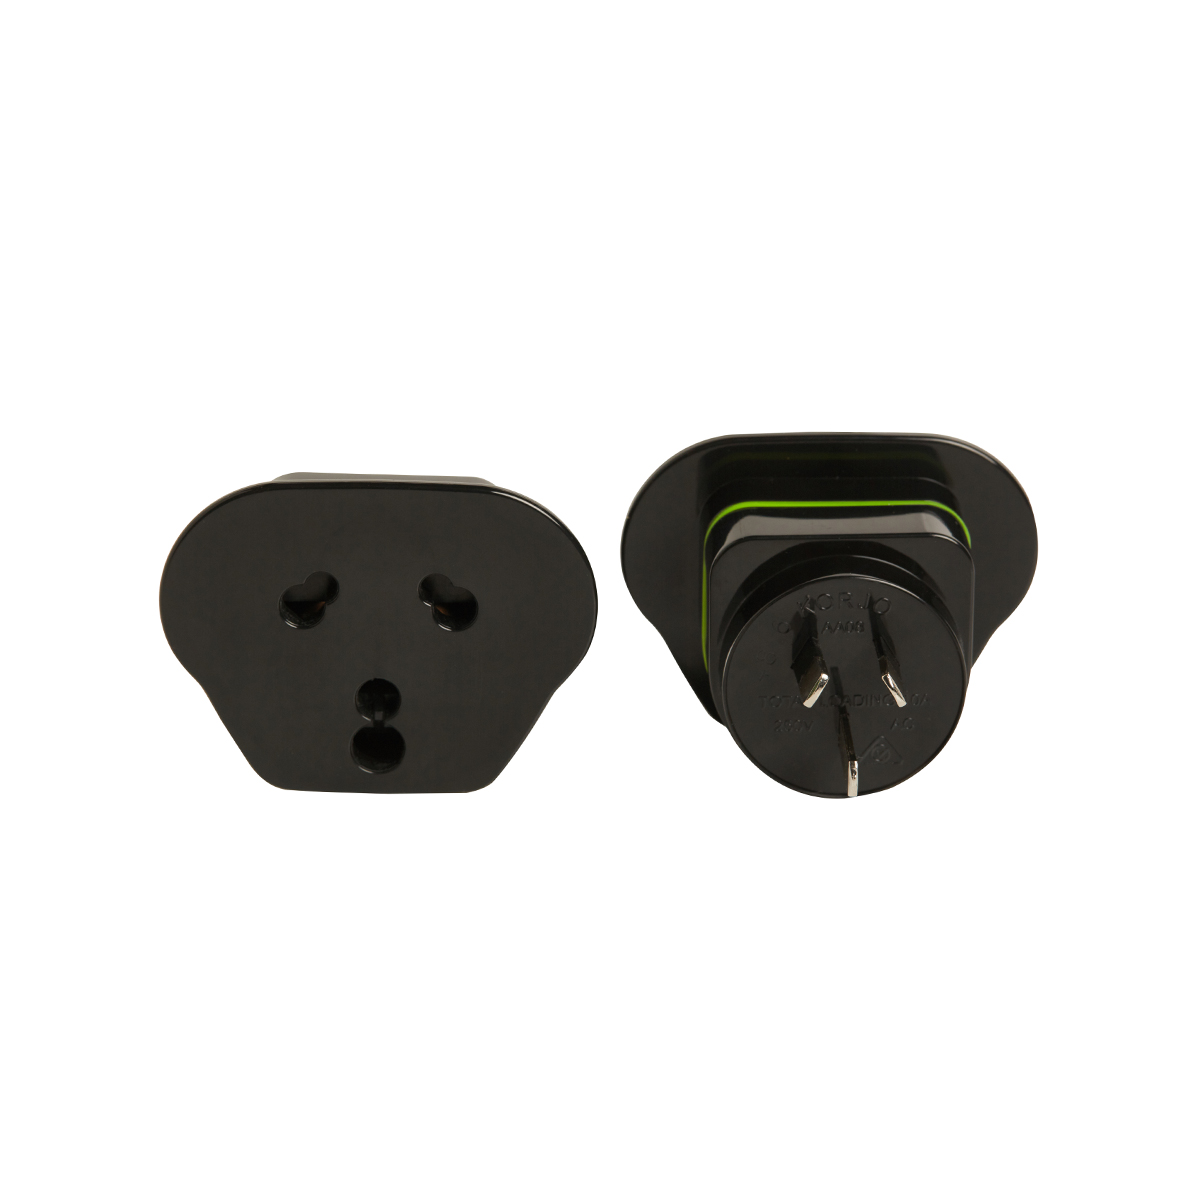 Adaptor for Australia - FROM Sth Africa, India